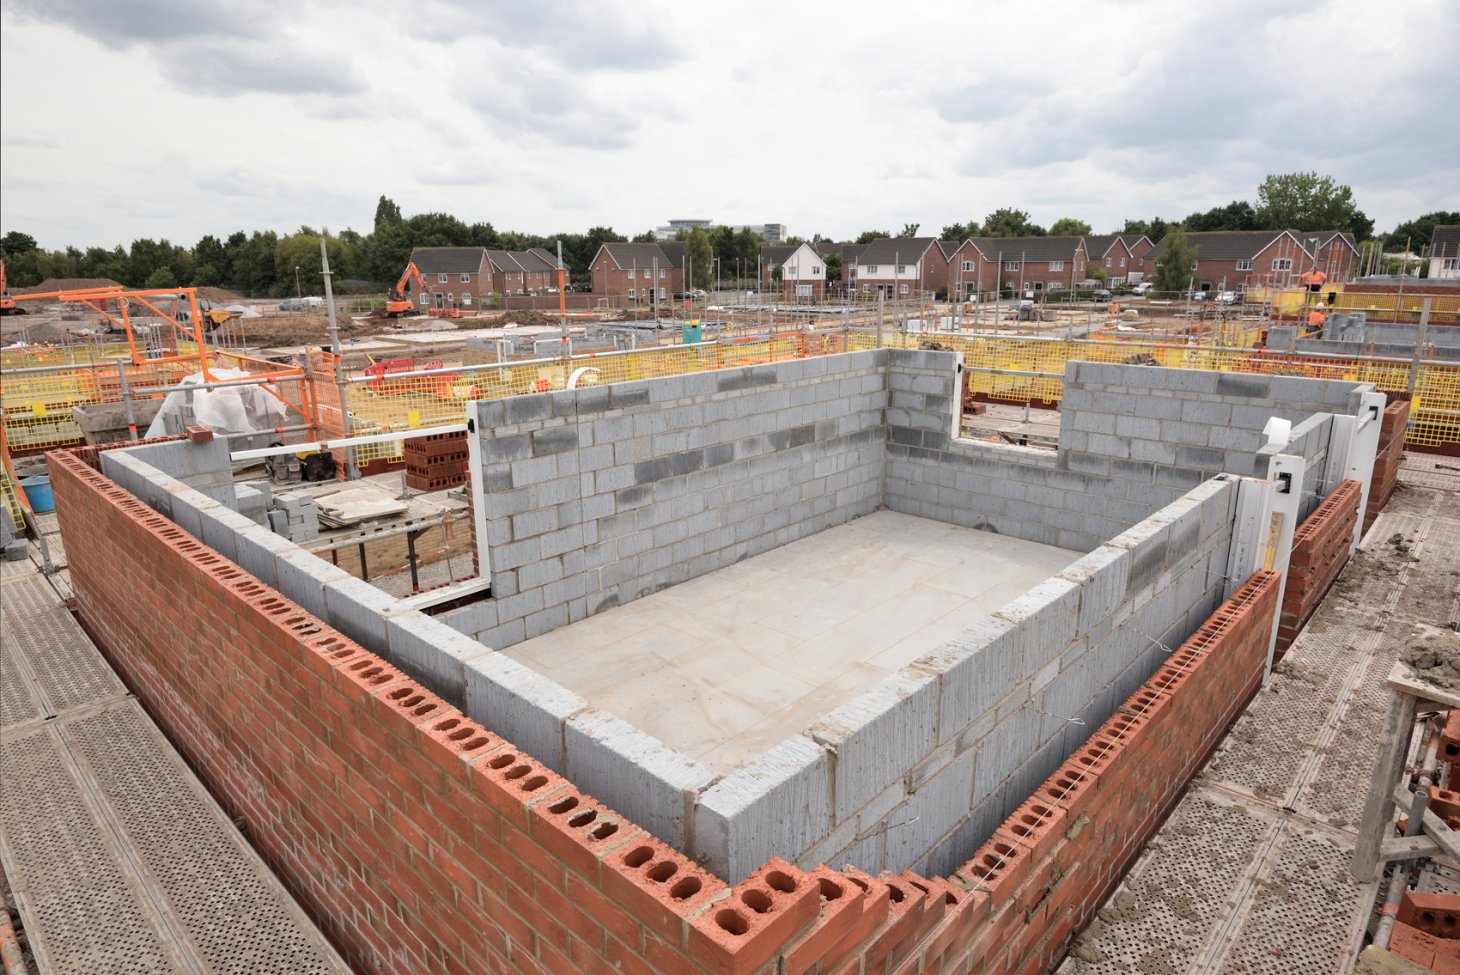 Northstone lays the foundations for large North East development with H+H Blocks 